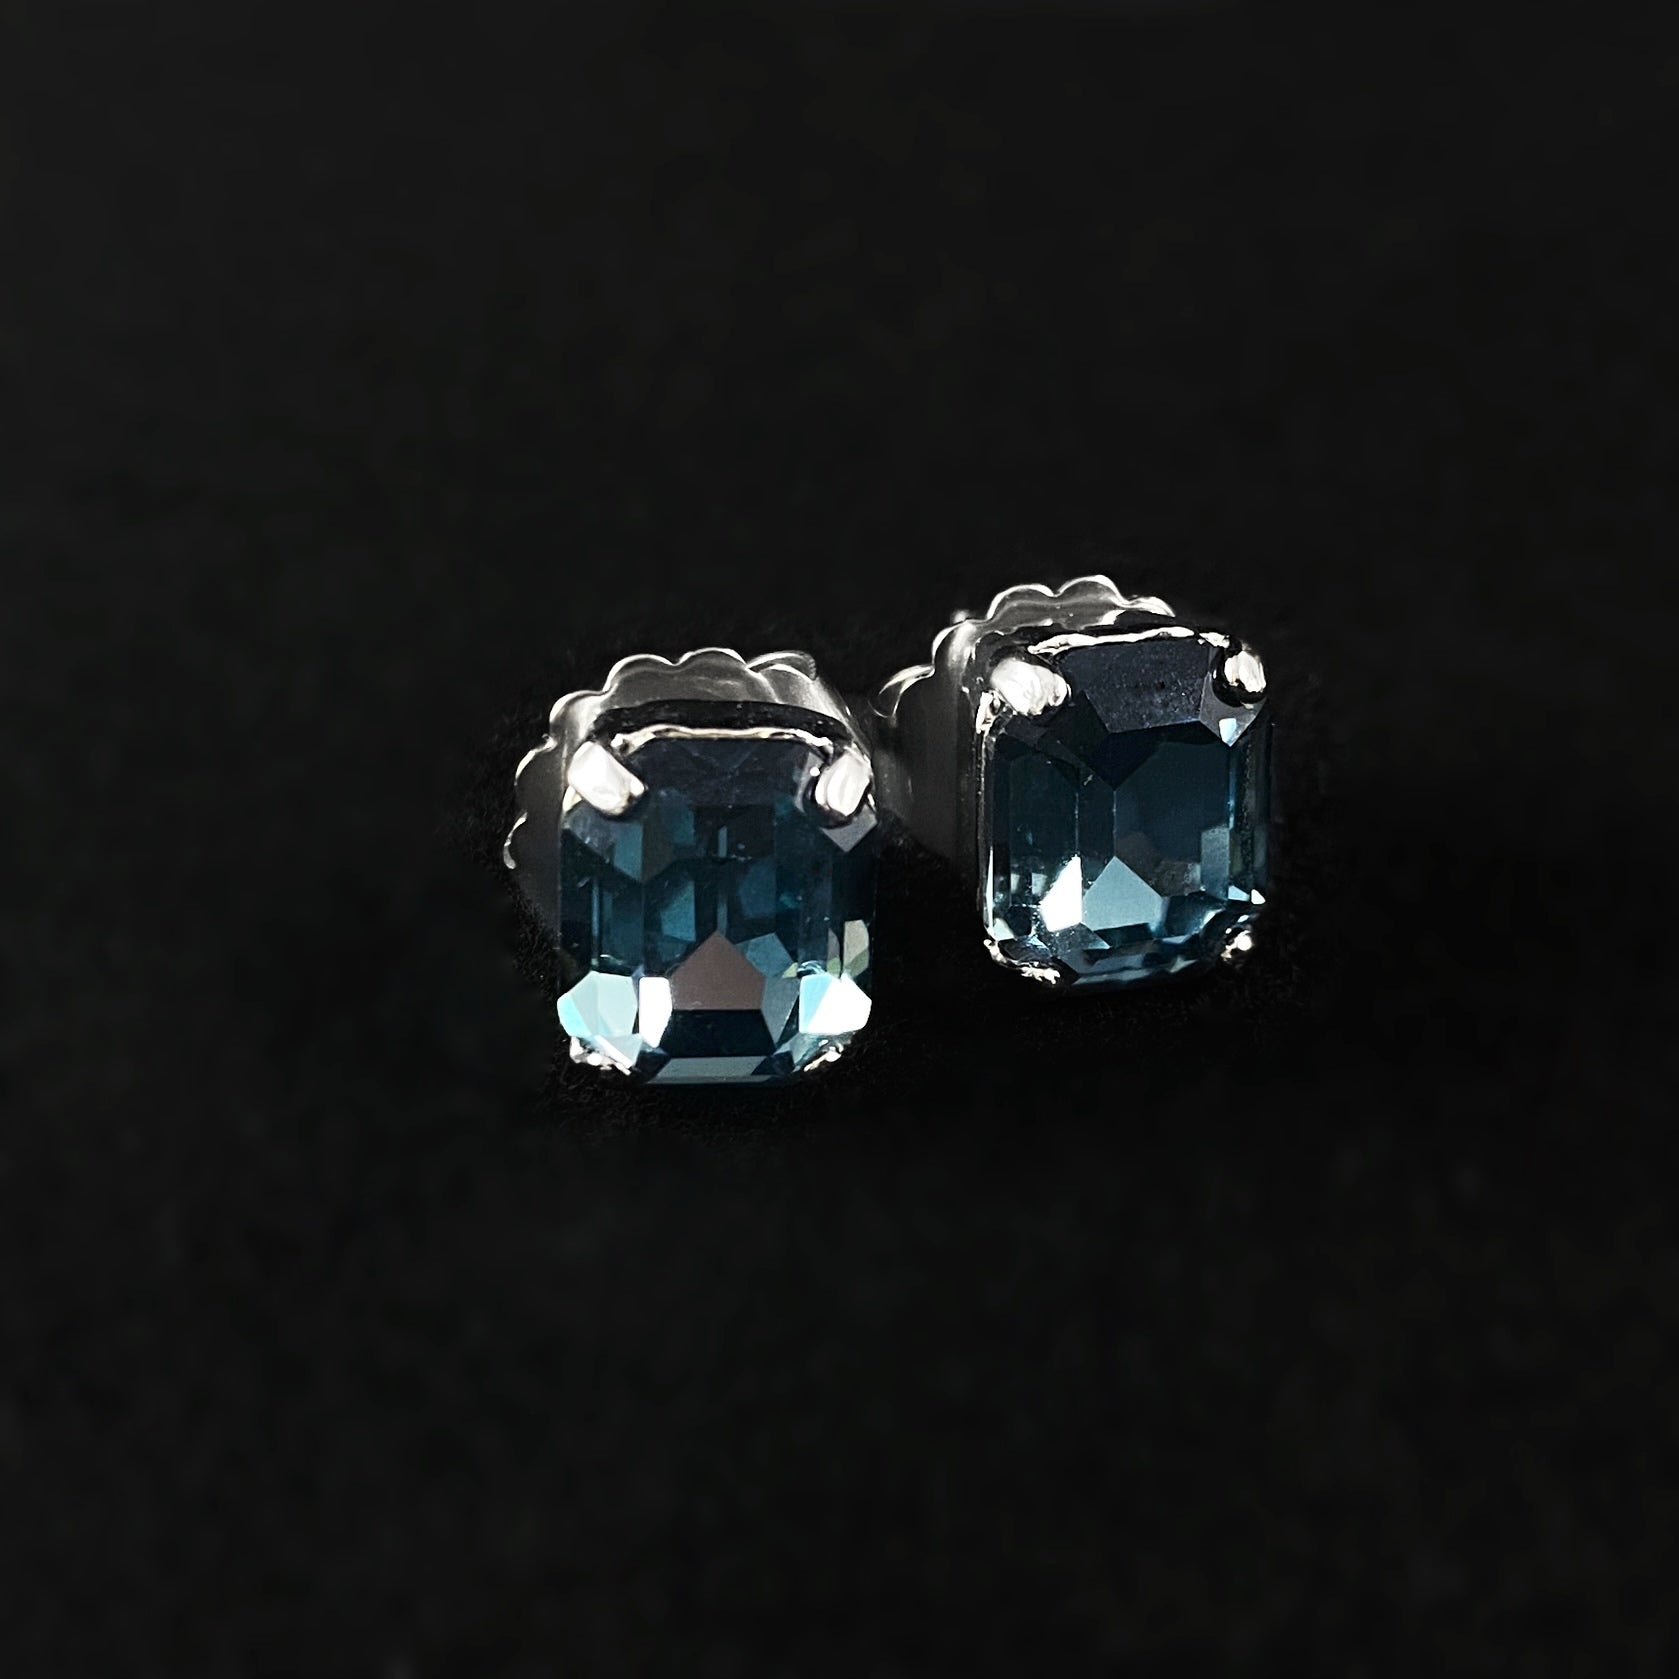 Blue Crystal Emerald Cut Earrings with Silver Finish and